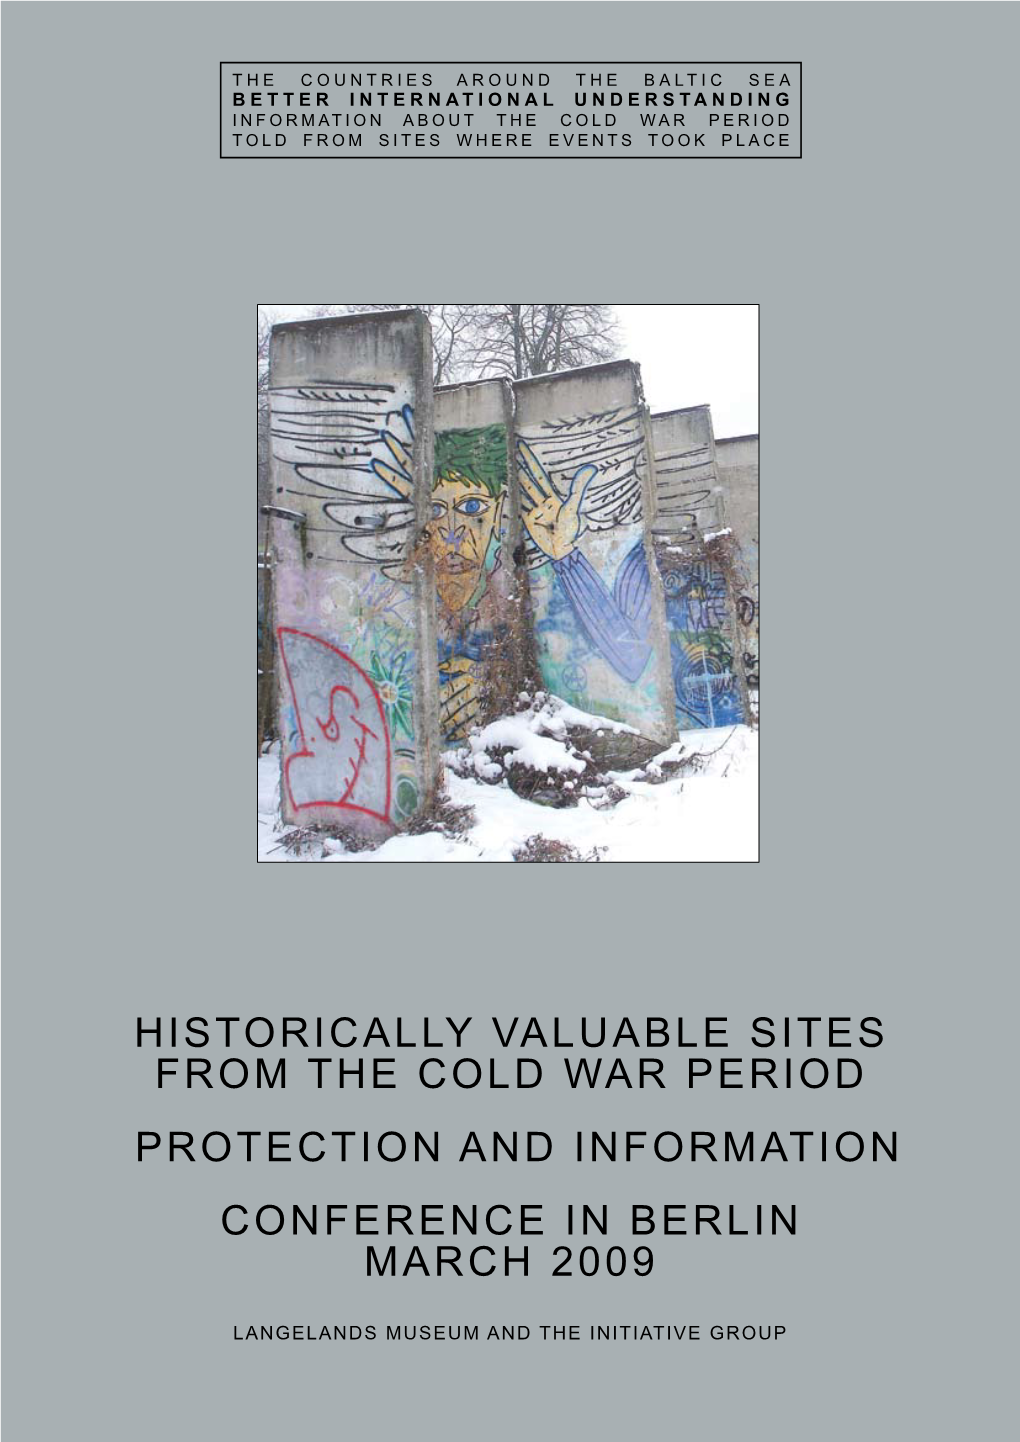 Historically Valuable Sites from the Cold War Period Protection and Information Conference in Berlin March 2009